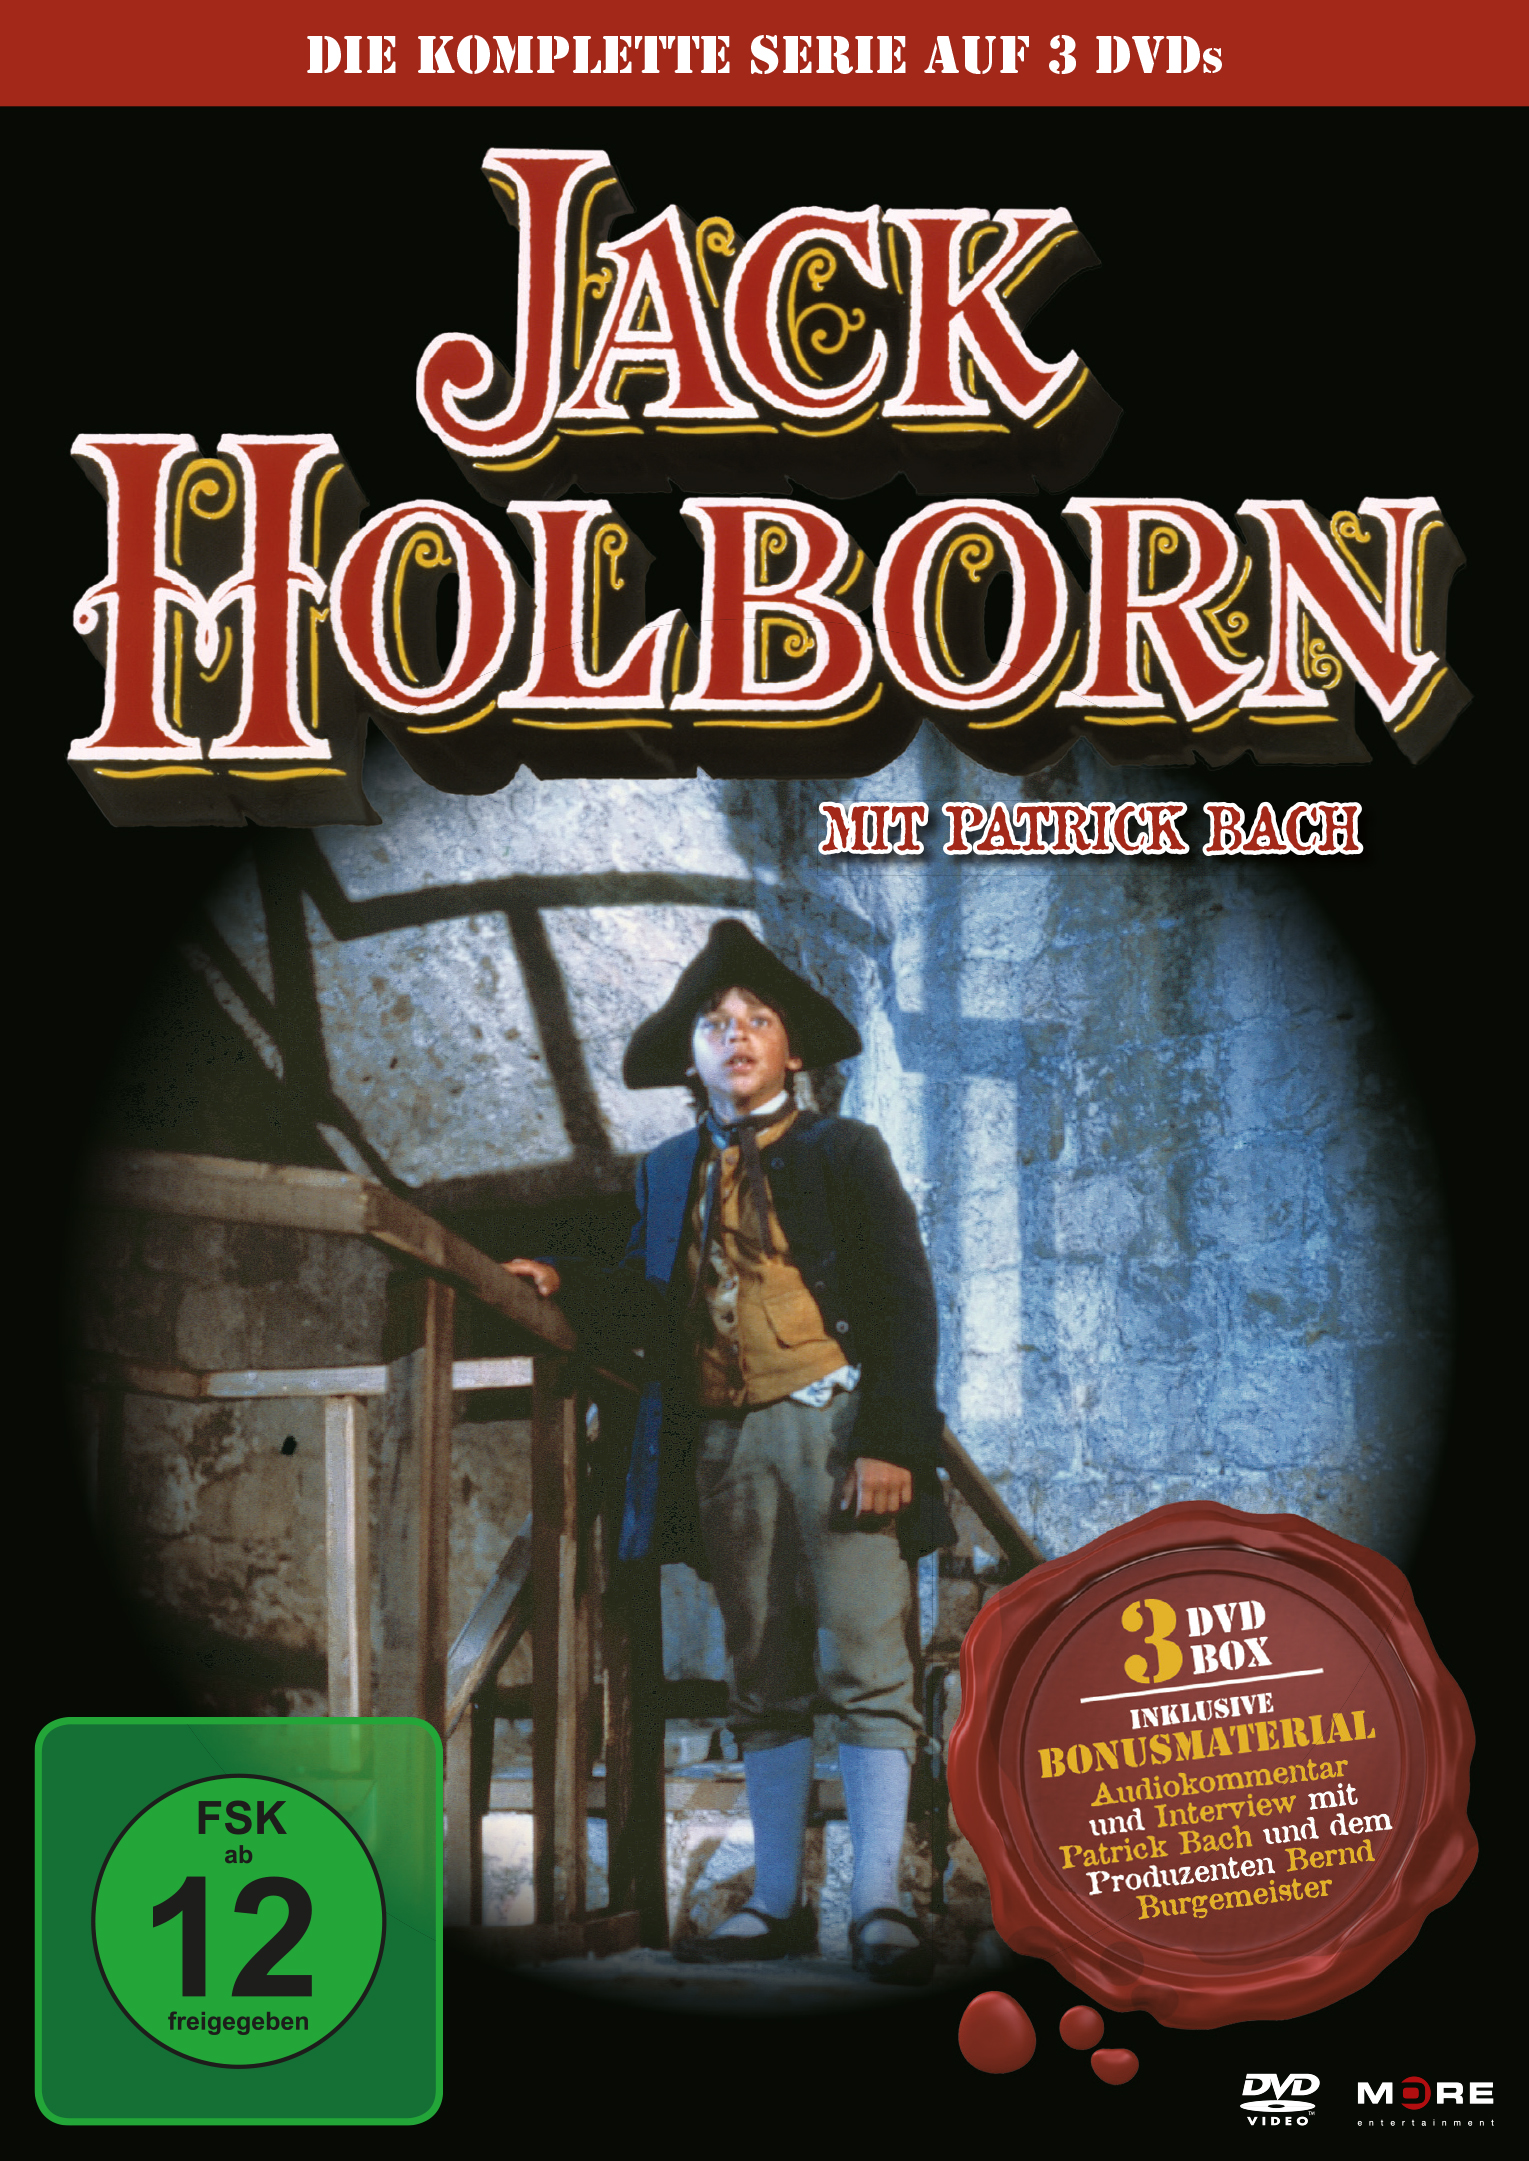 Jack Holborn (1982) with Patrick Bach Complete Series on DVD 4